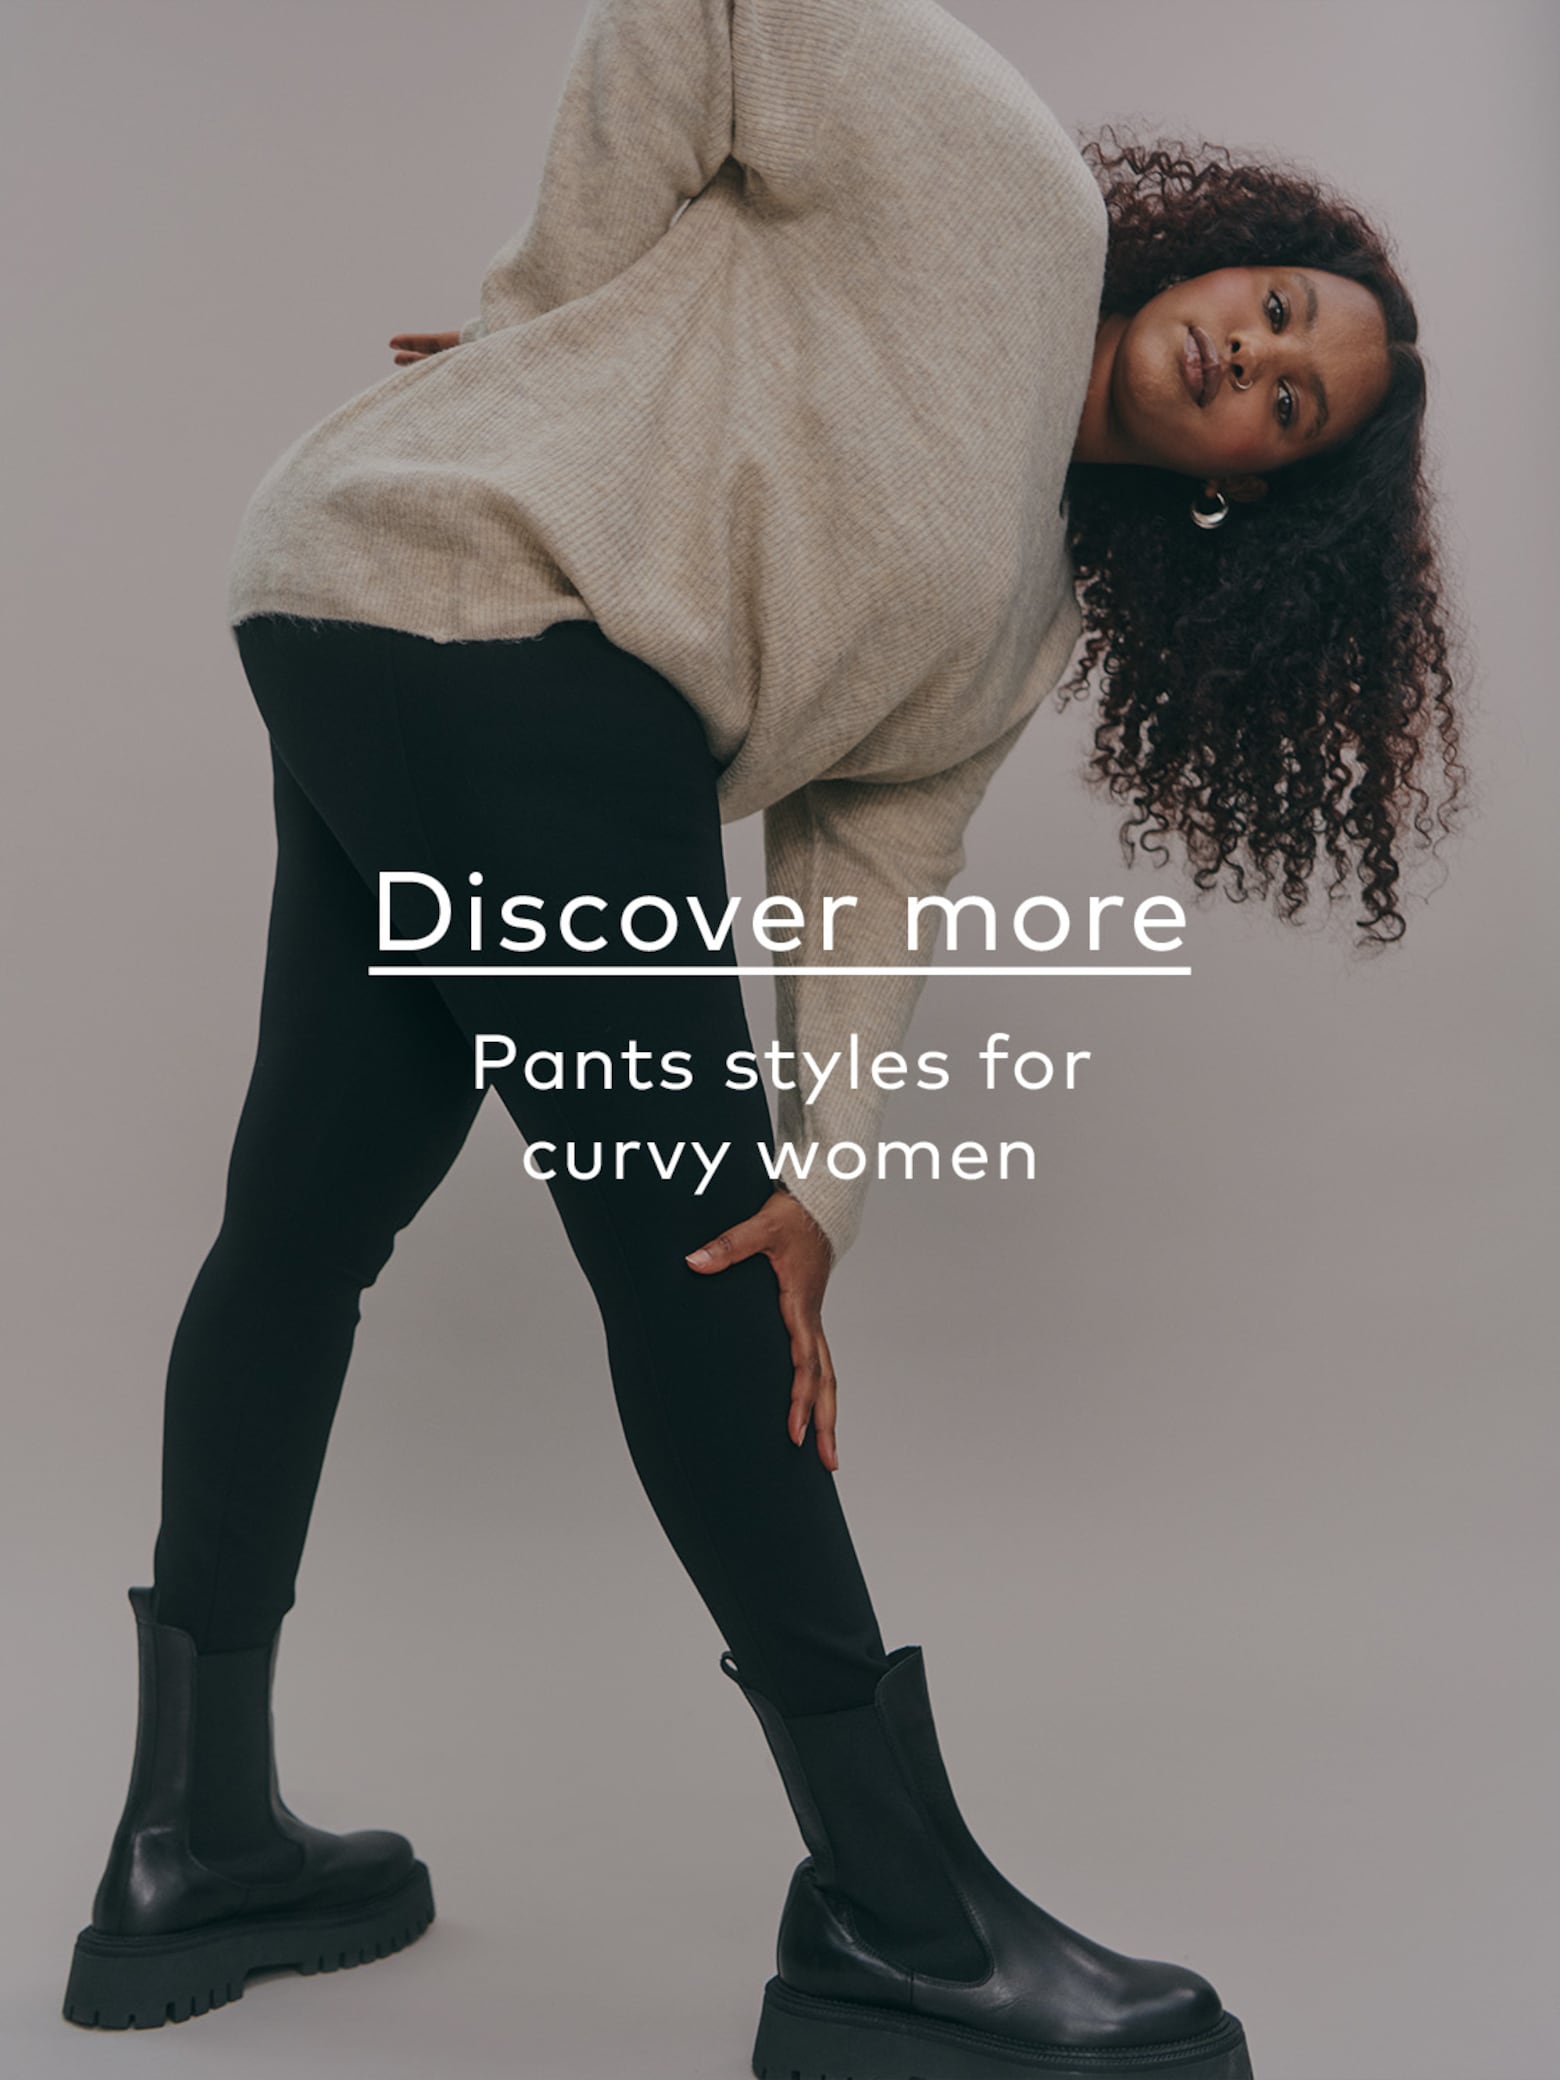 Anything but ordinary Pants styles for all figures